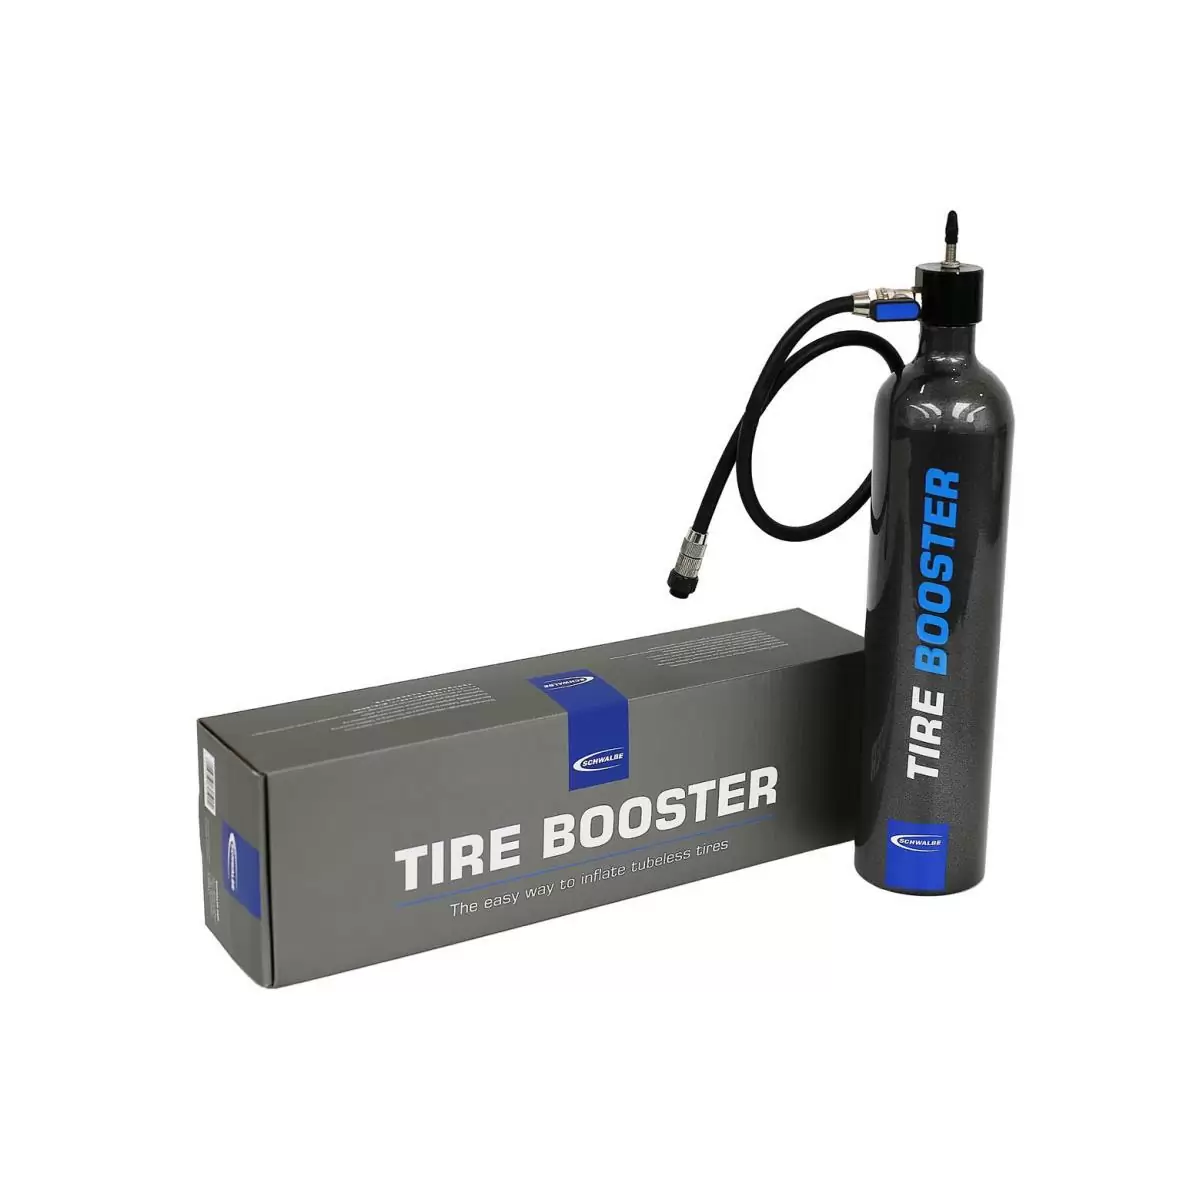 Tire Booster 11bar for Tubeless tires inflation - image